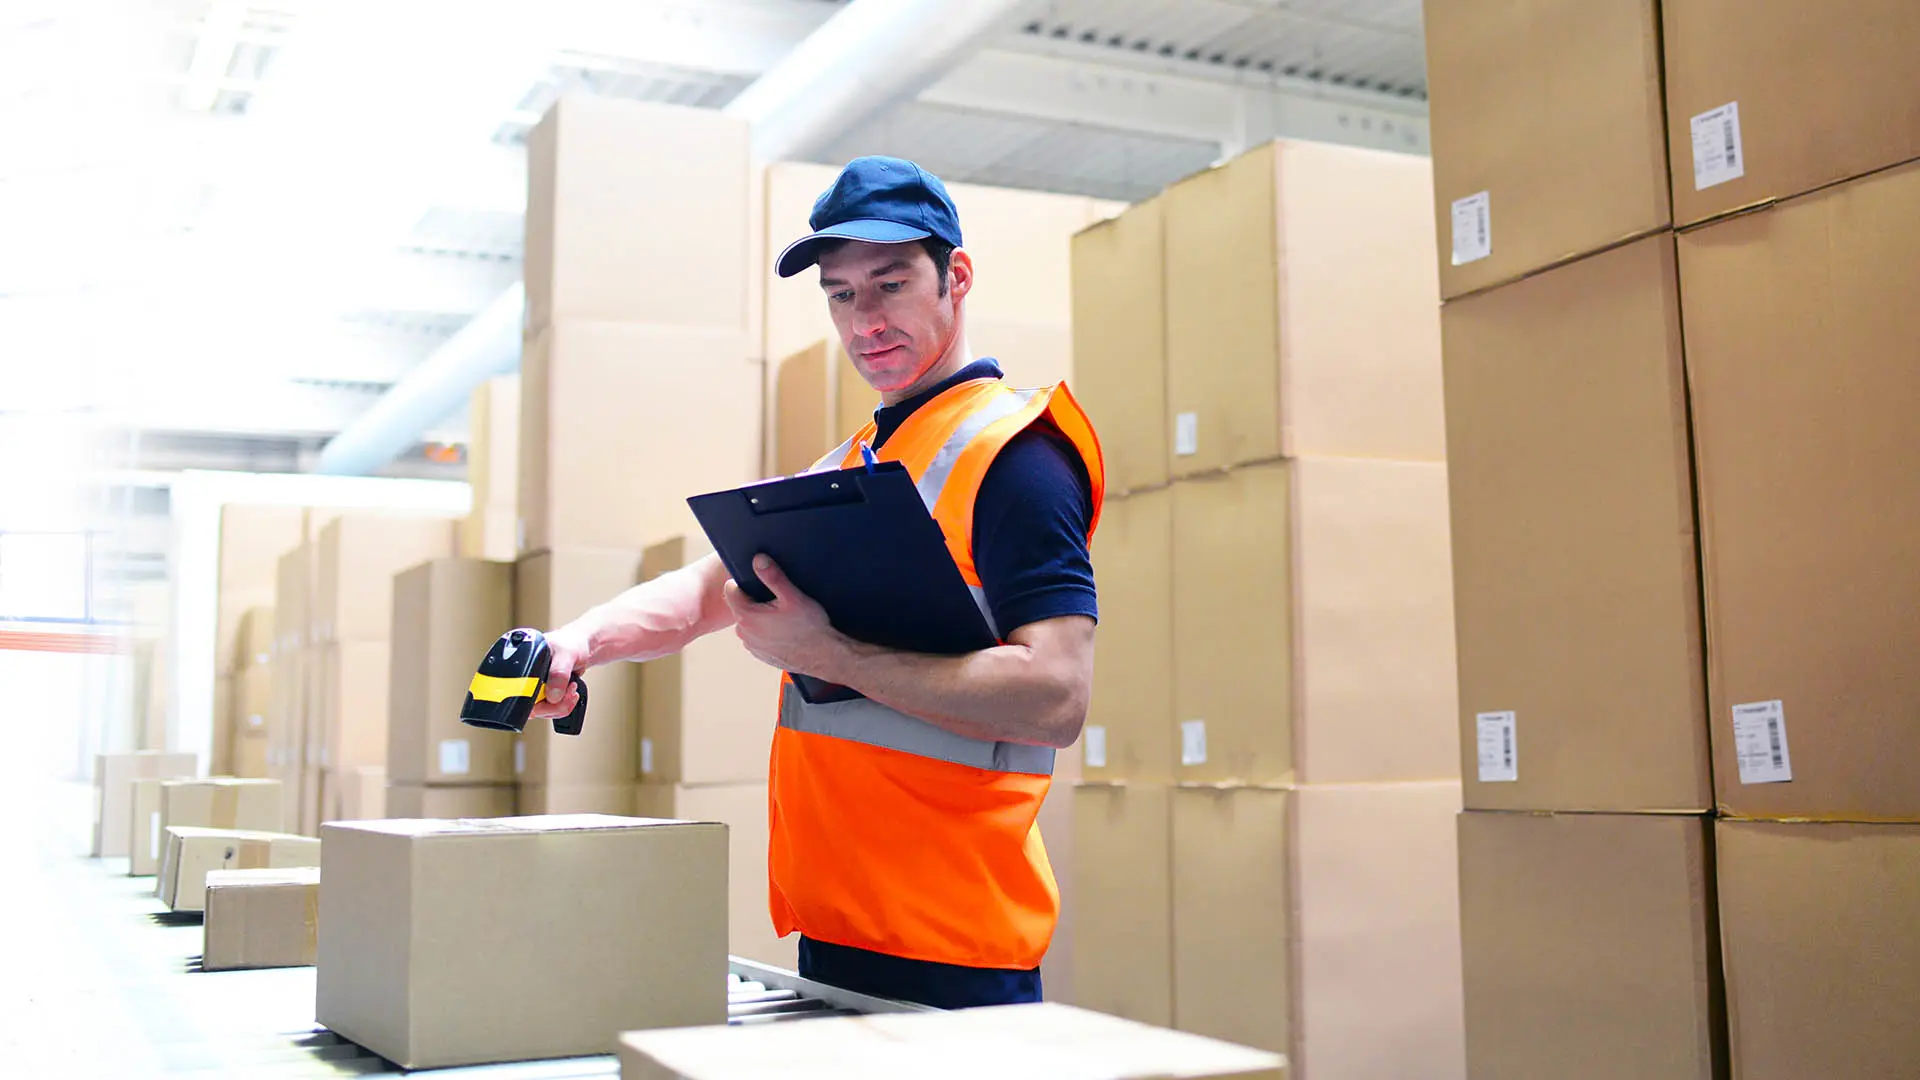 Warehouse scanning packages